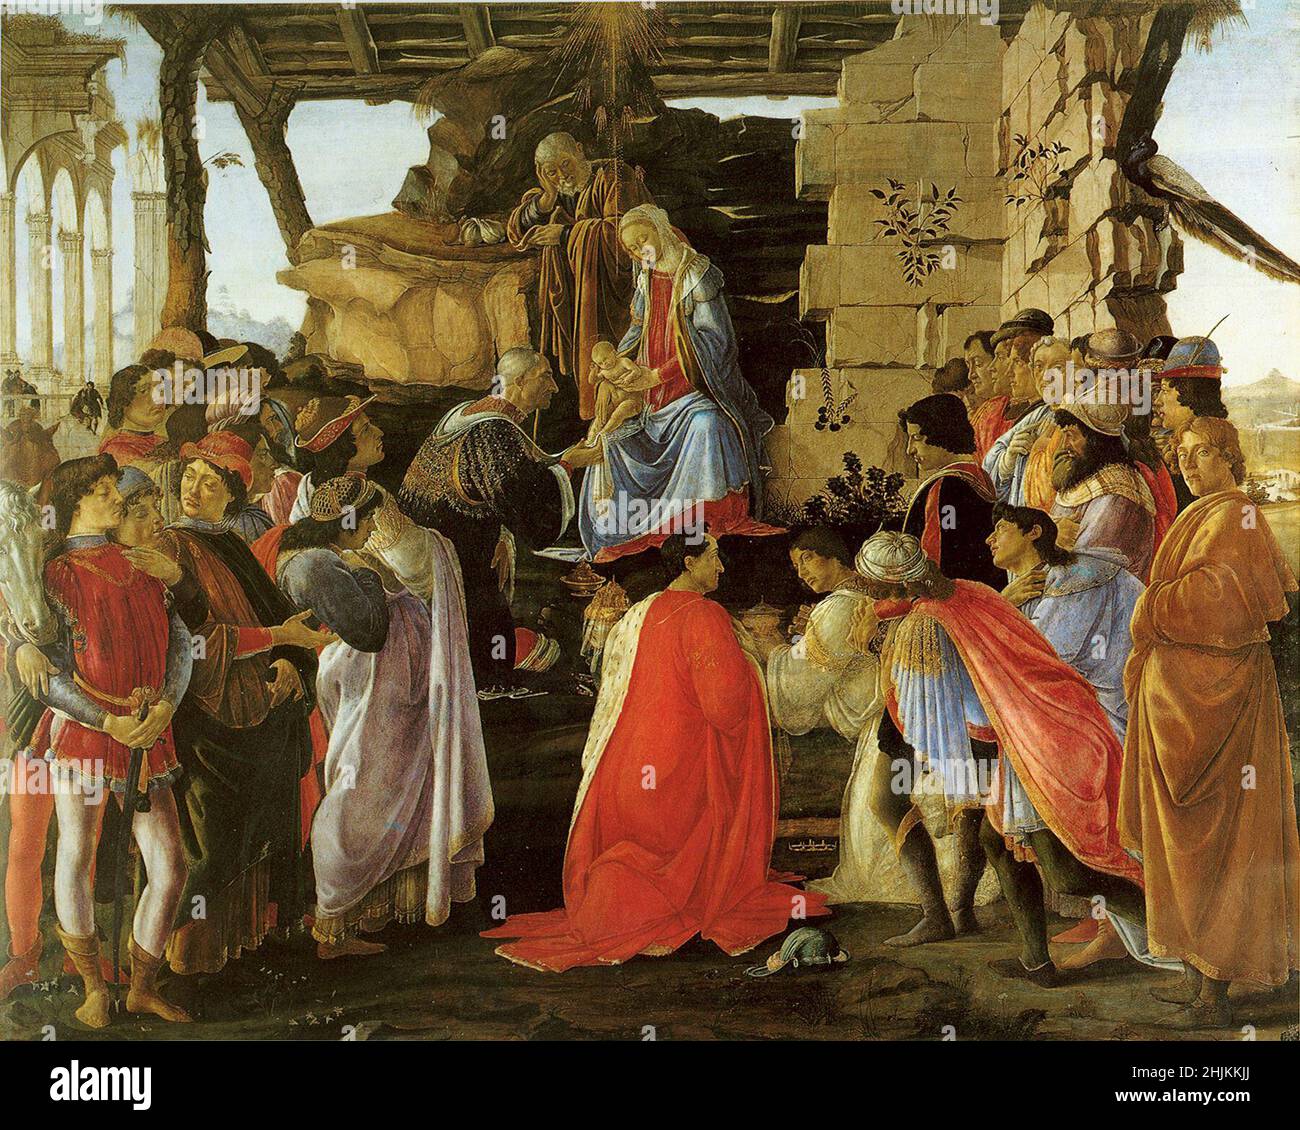 Sandro Botticelli  (1445–1510) Sandro Botticelli: Adoration of the Magi  Depiction of the members of the Medici family as kings: Cosimo de' Medici (kneeling), Piero de' Medici and Giovanni (figures from the back in the centre) and members of the Medici court Datecirca 1476 Stock Photo